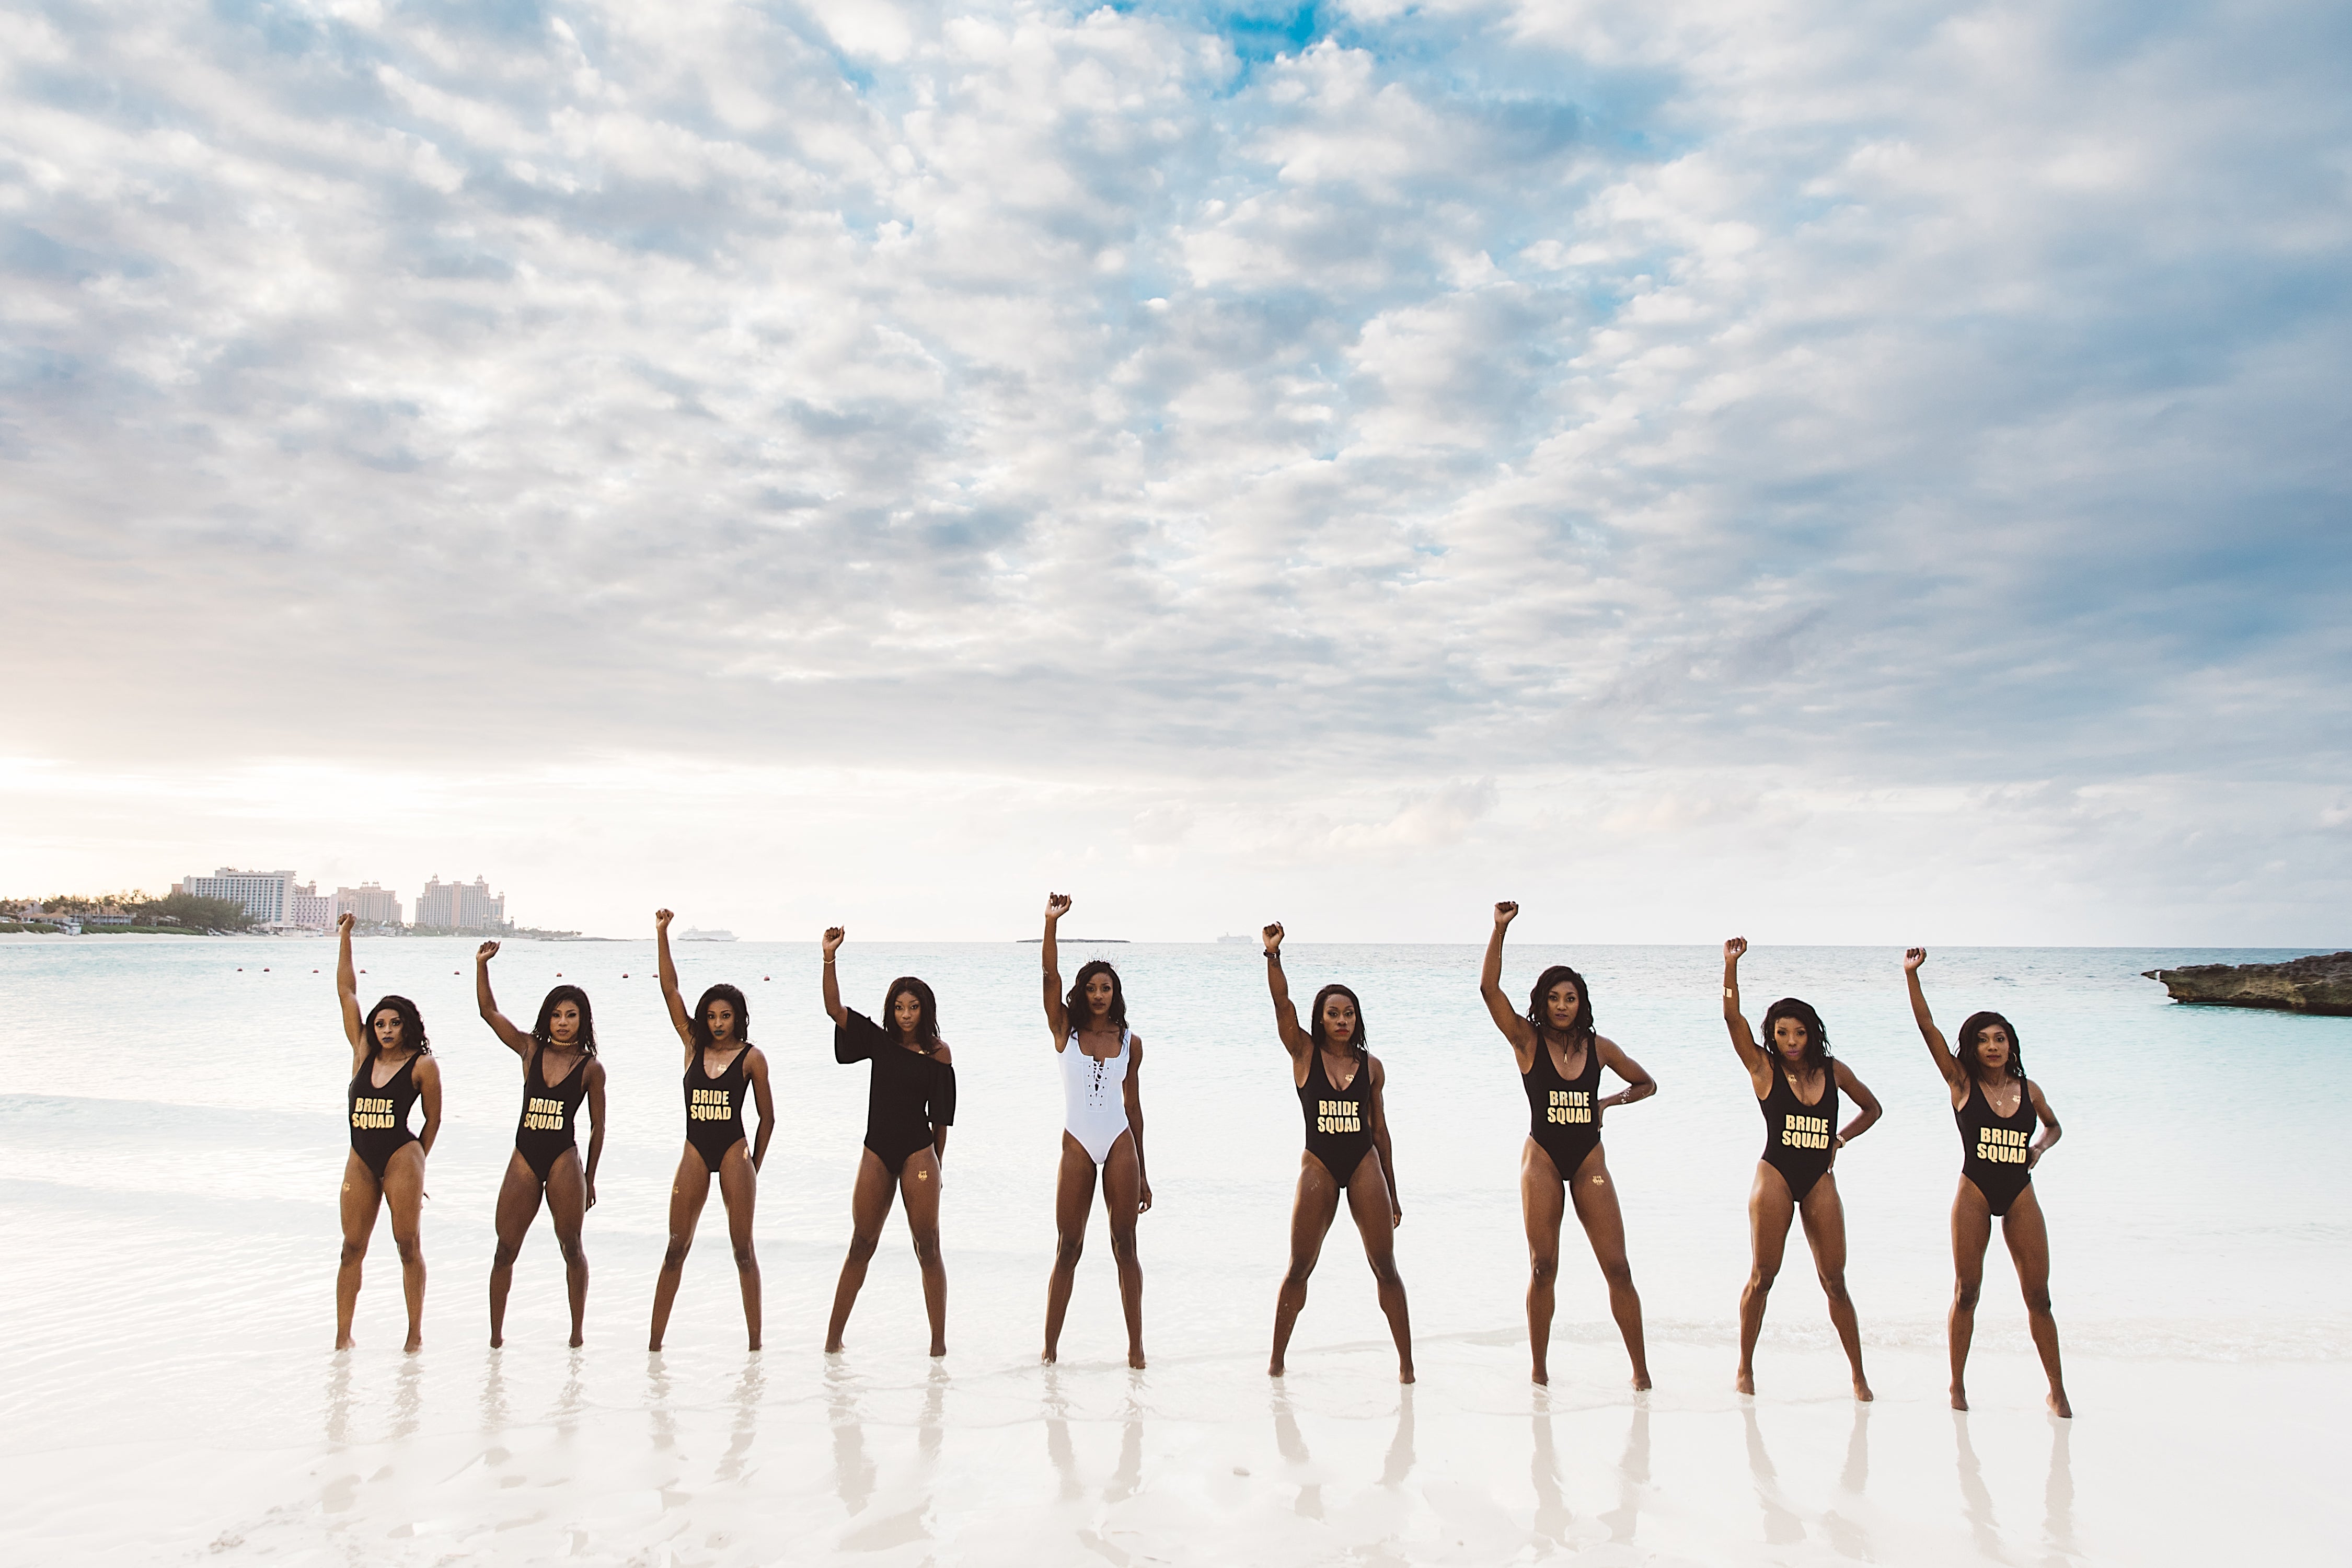 Olympic Gold Medalist Shaunae Miller and Her Bridal Party Slay Their Bahamas Photo Shoot
